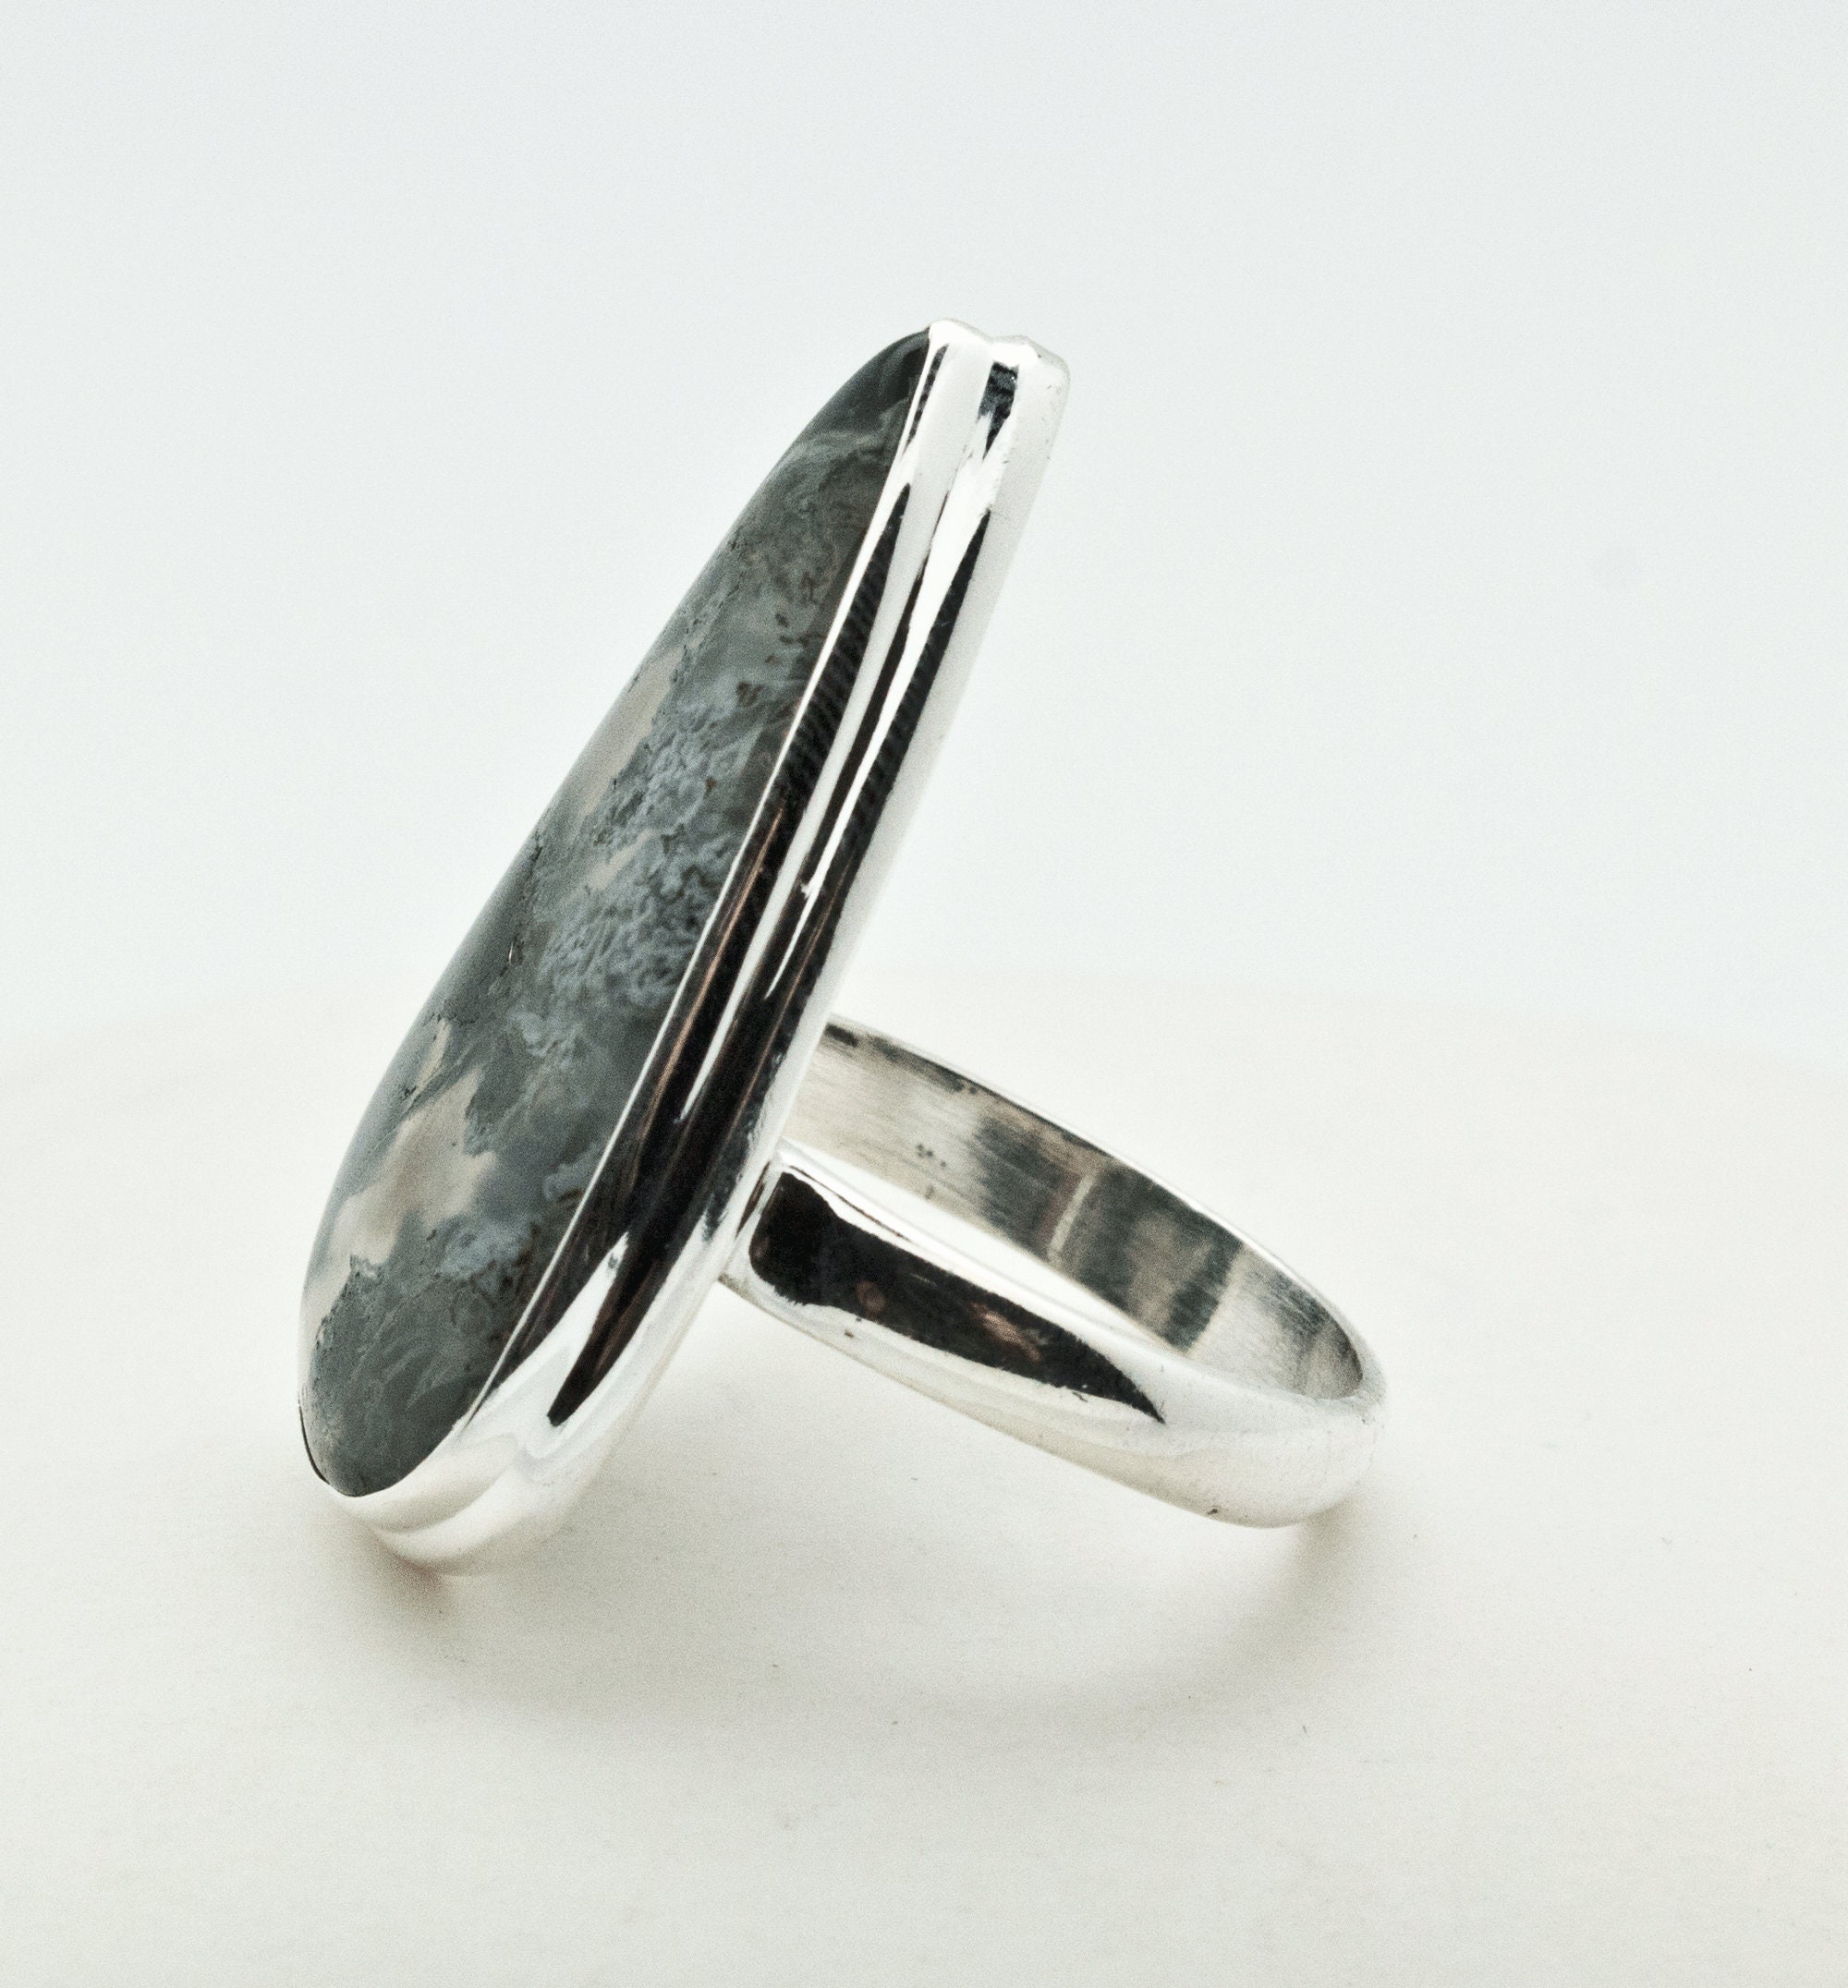 Osbee Sterling Silver Moss Agate Ring Size 9